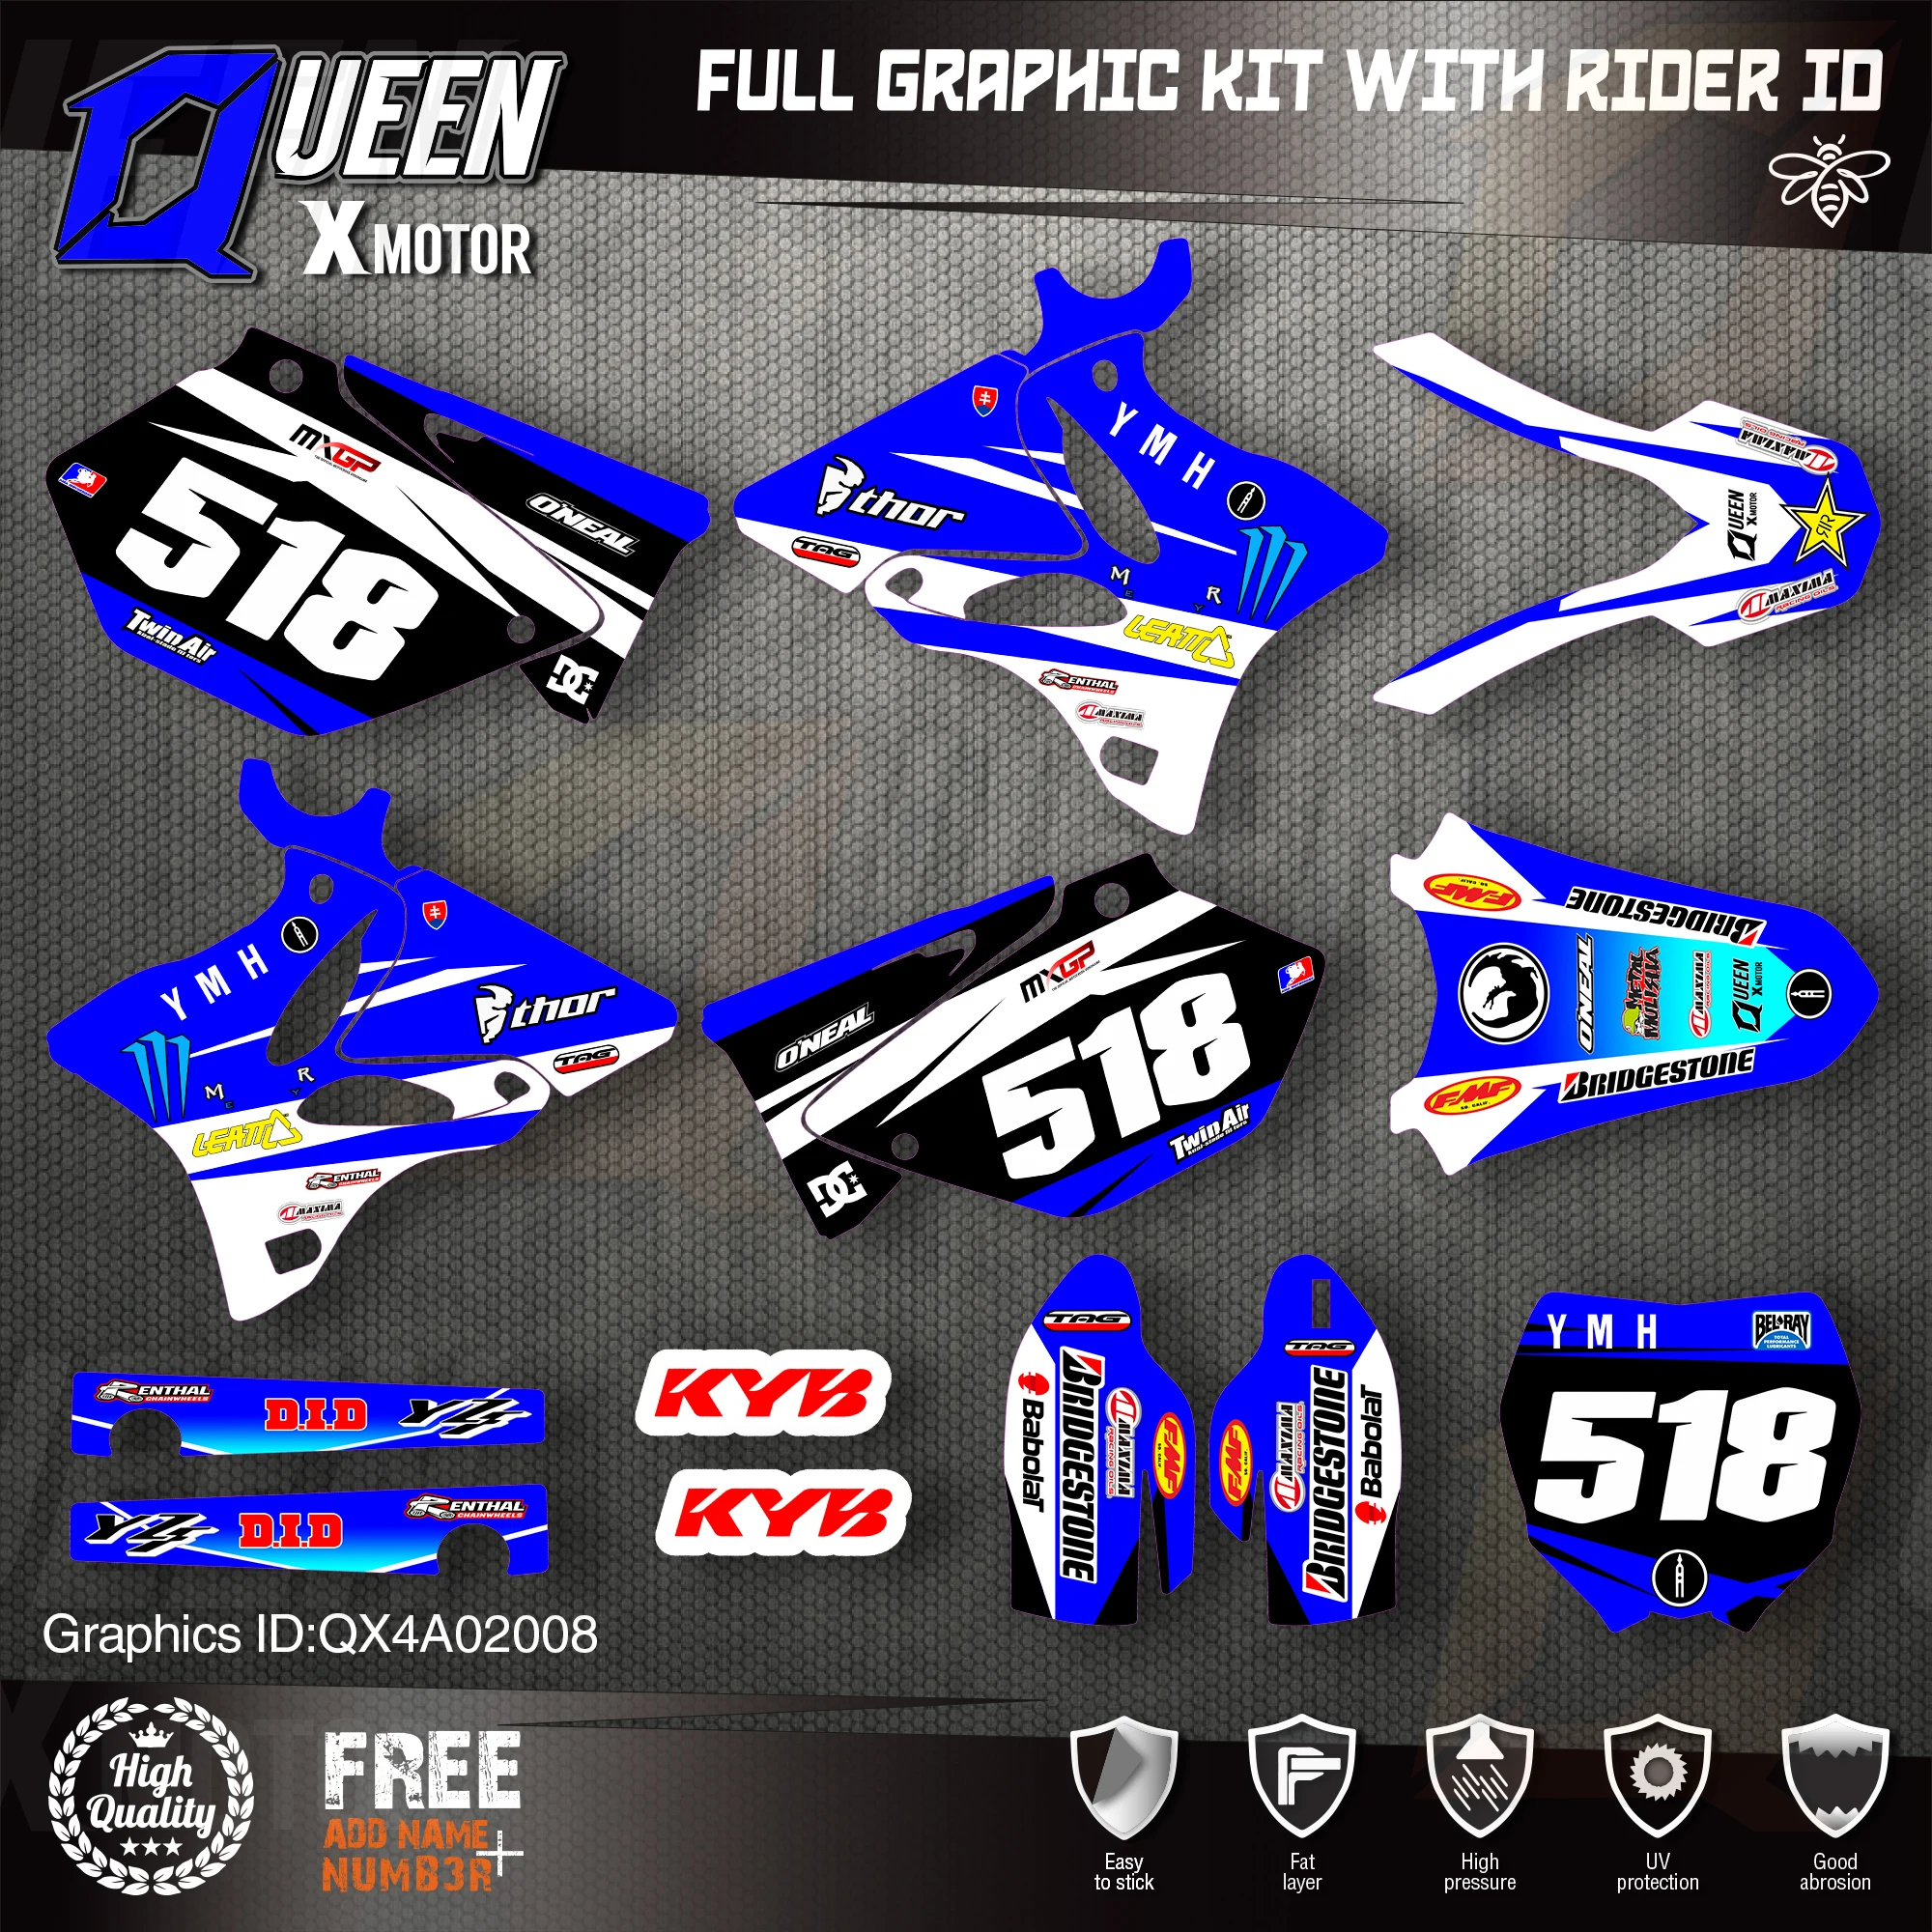 

QUEEN X MOTOR Custom Team Graphics Backgrounds Decals 3M Stickers Kit For YAMAHA 2002-2014 YZ125 YZ250 008